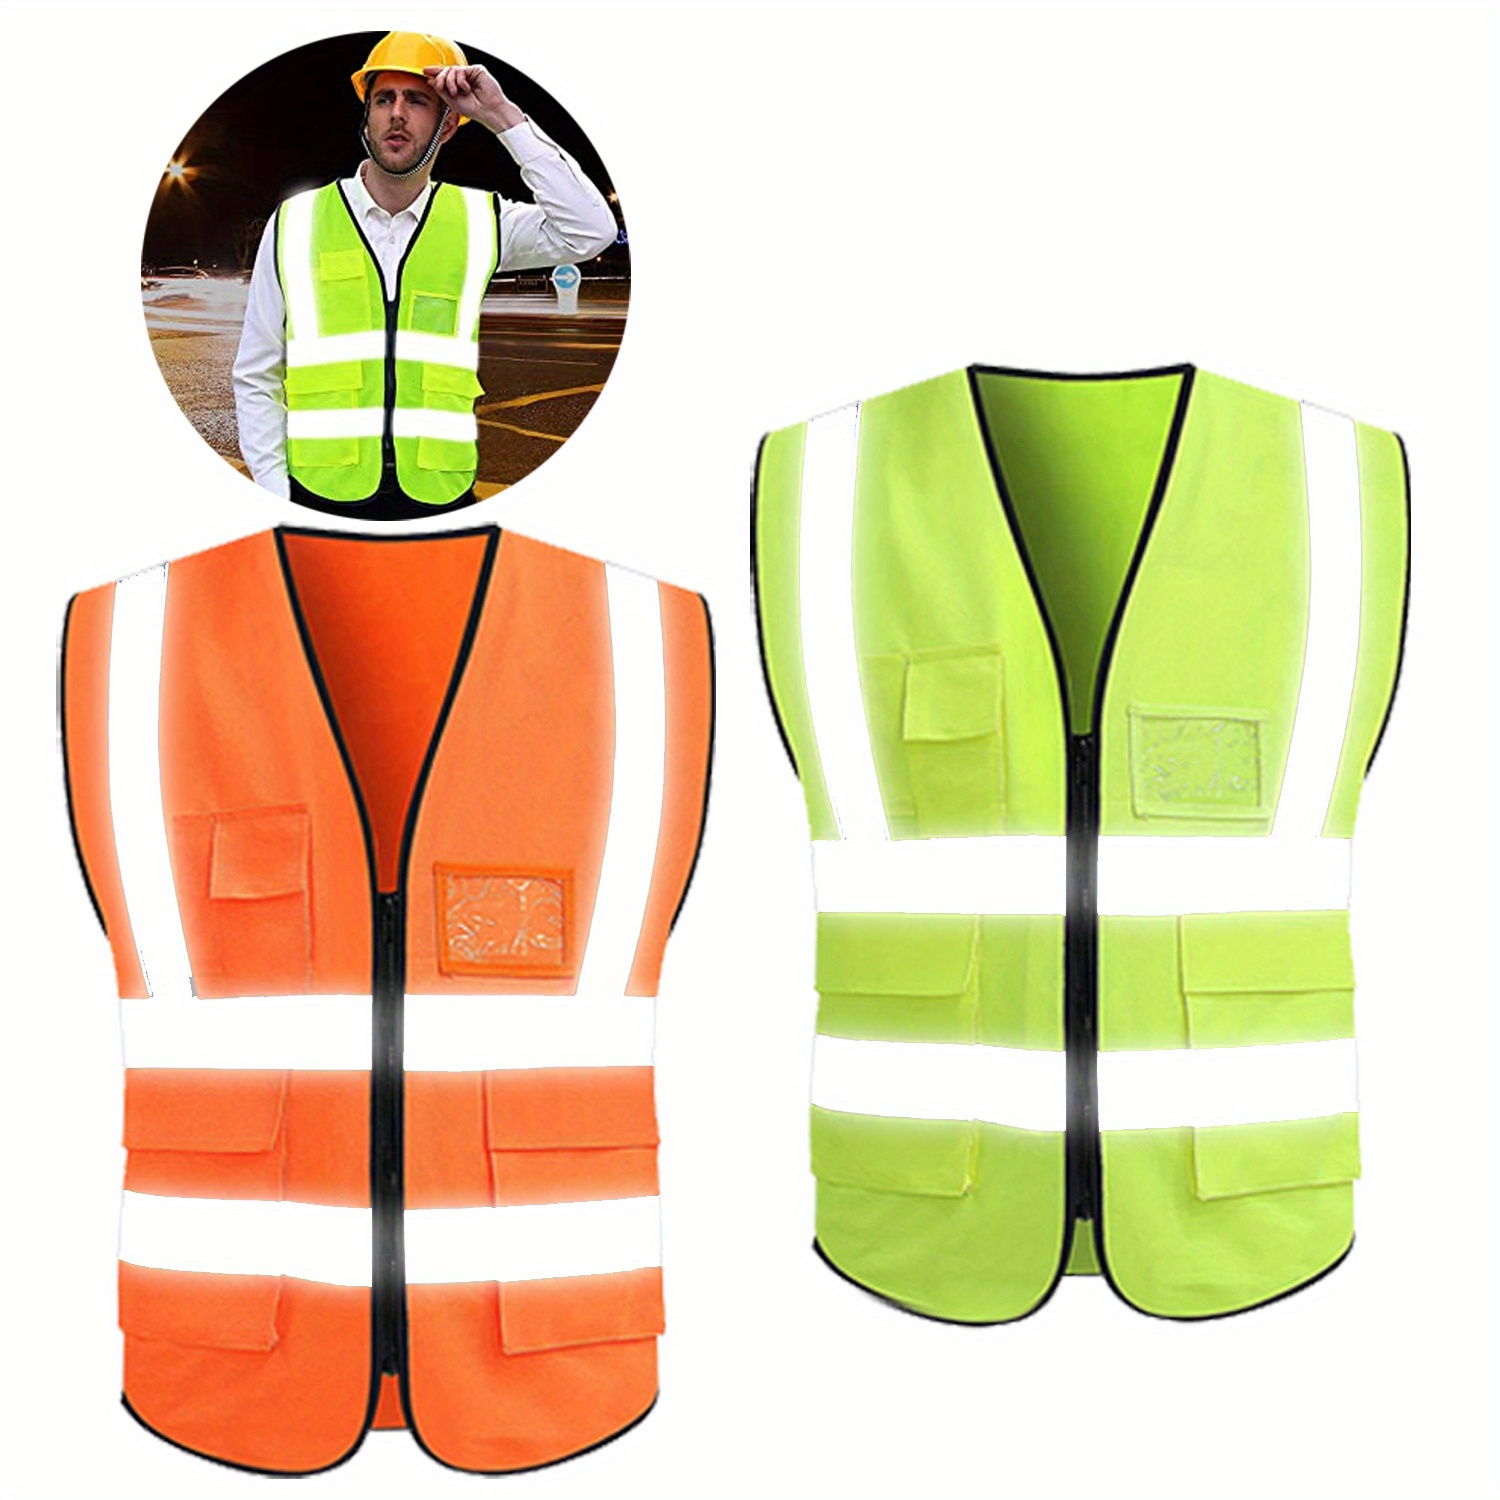 Reflective Clothing - Safer Running and Cycling Gear